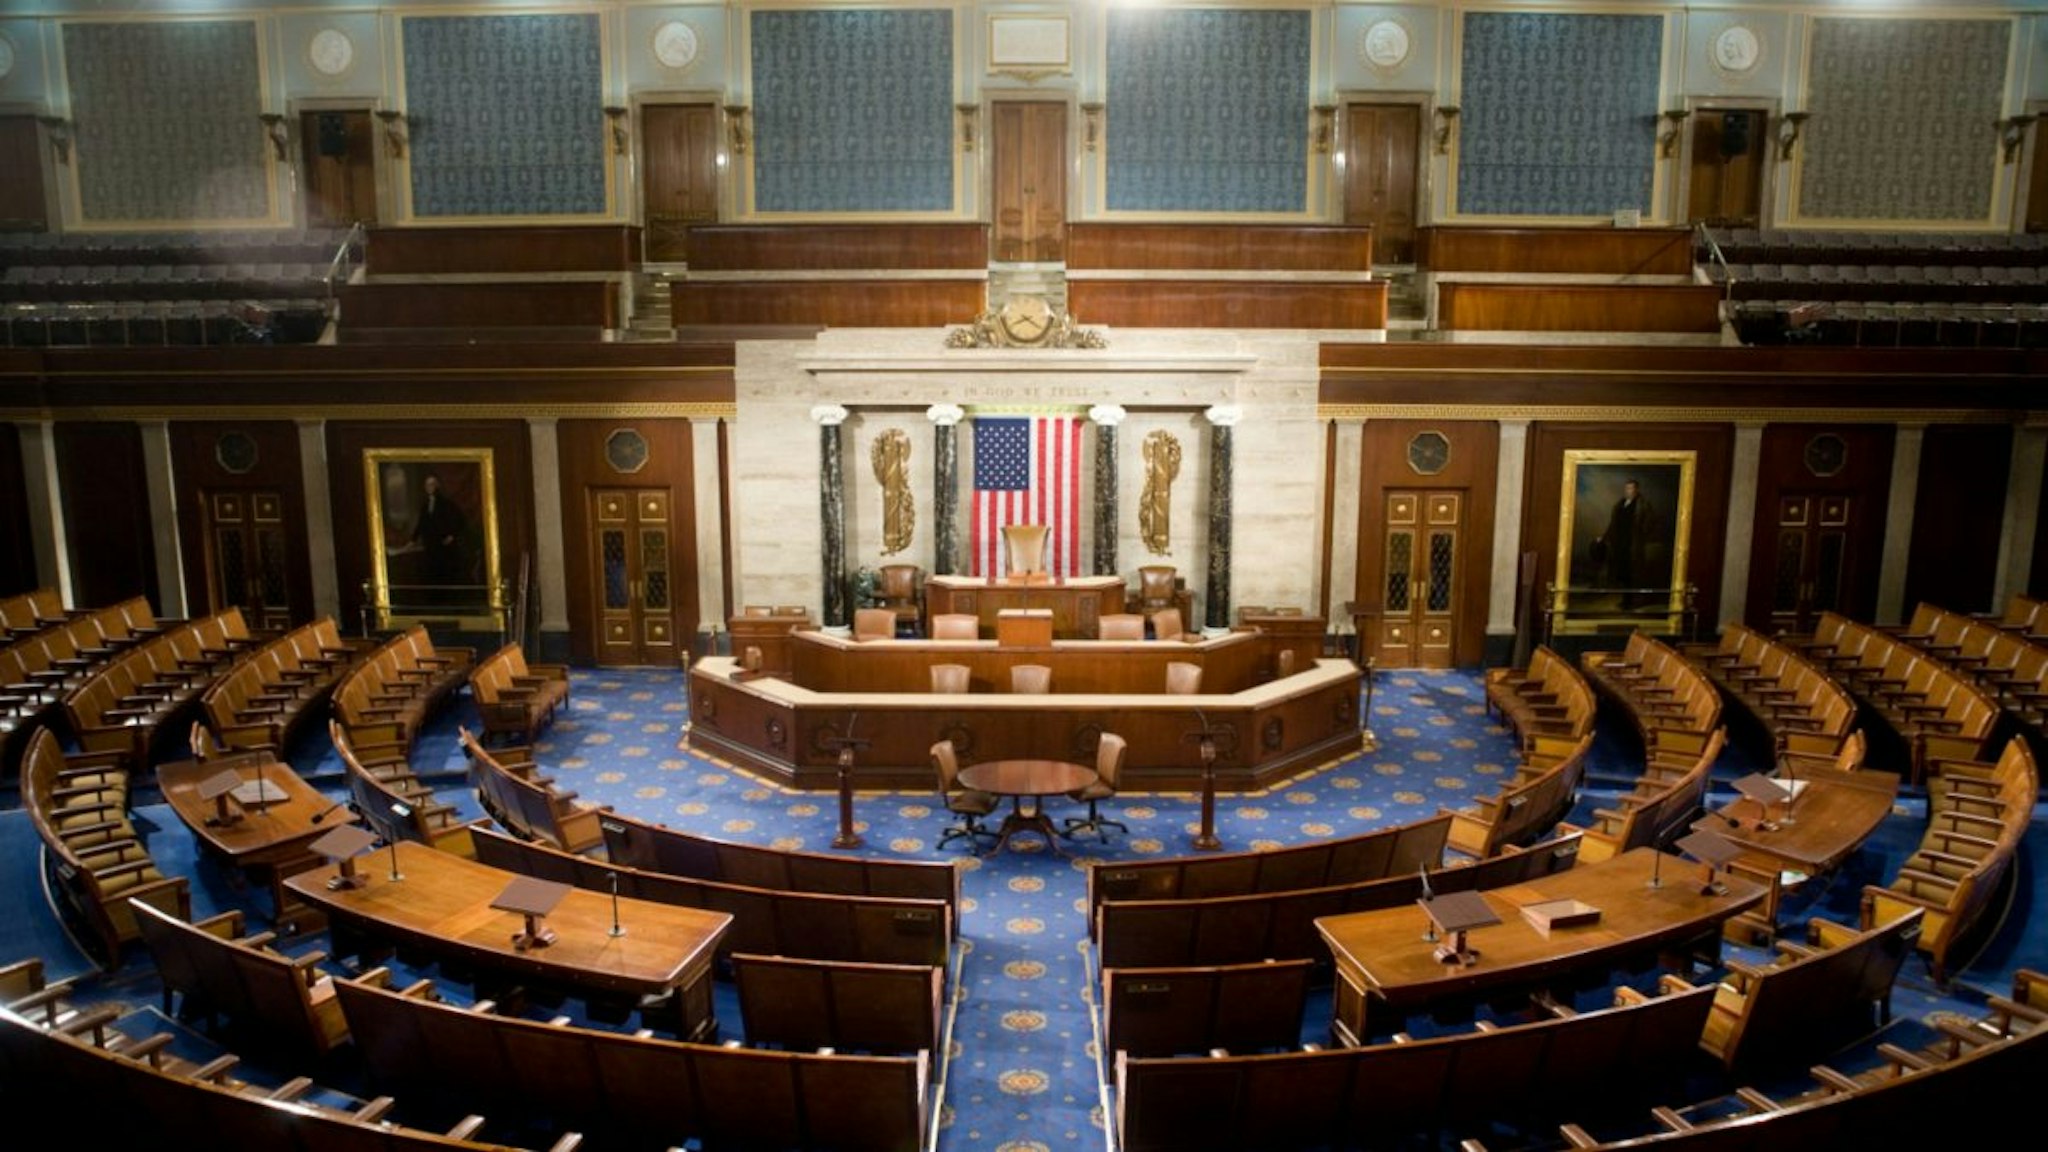 The U.S. House of Representatives chamber is seen December 8, 2008 in Washington, DC.